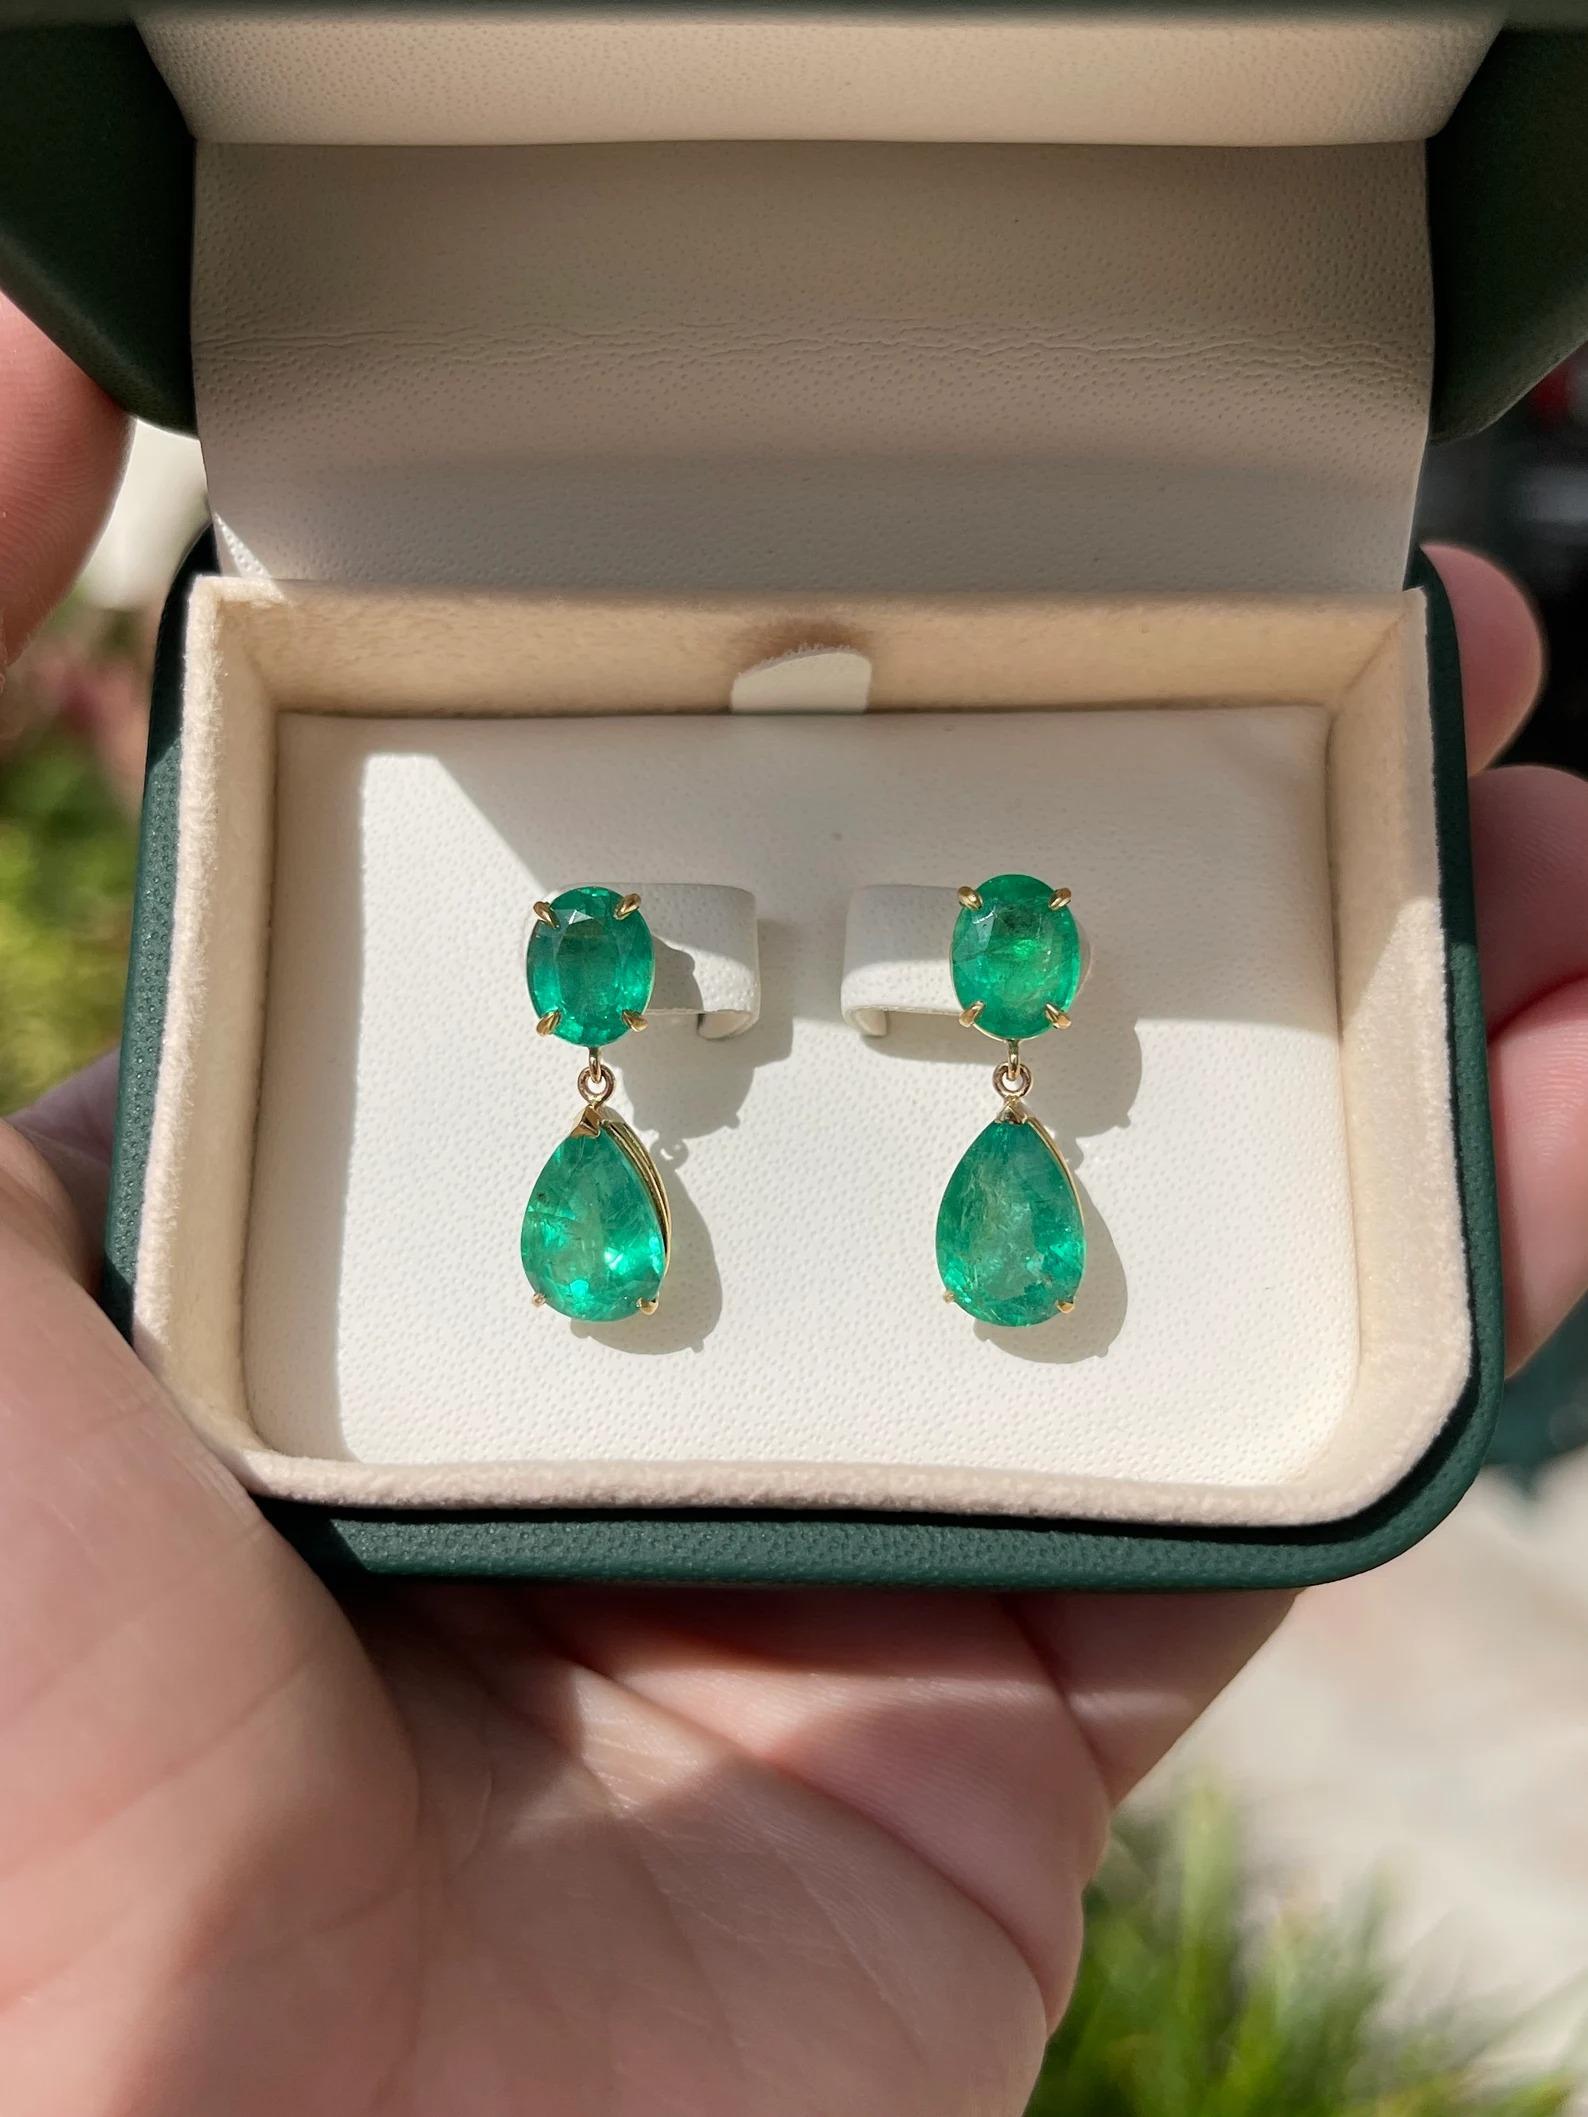 Drool over these fascinating natural vivid dark green emerald oval and pear dangle earrings in solid 18K. Two stunning oval-cut emeralds weighing 3.76tcw showcase a lustrous rich dark green color, accented by large 6.02tcw teardrop emeralds that